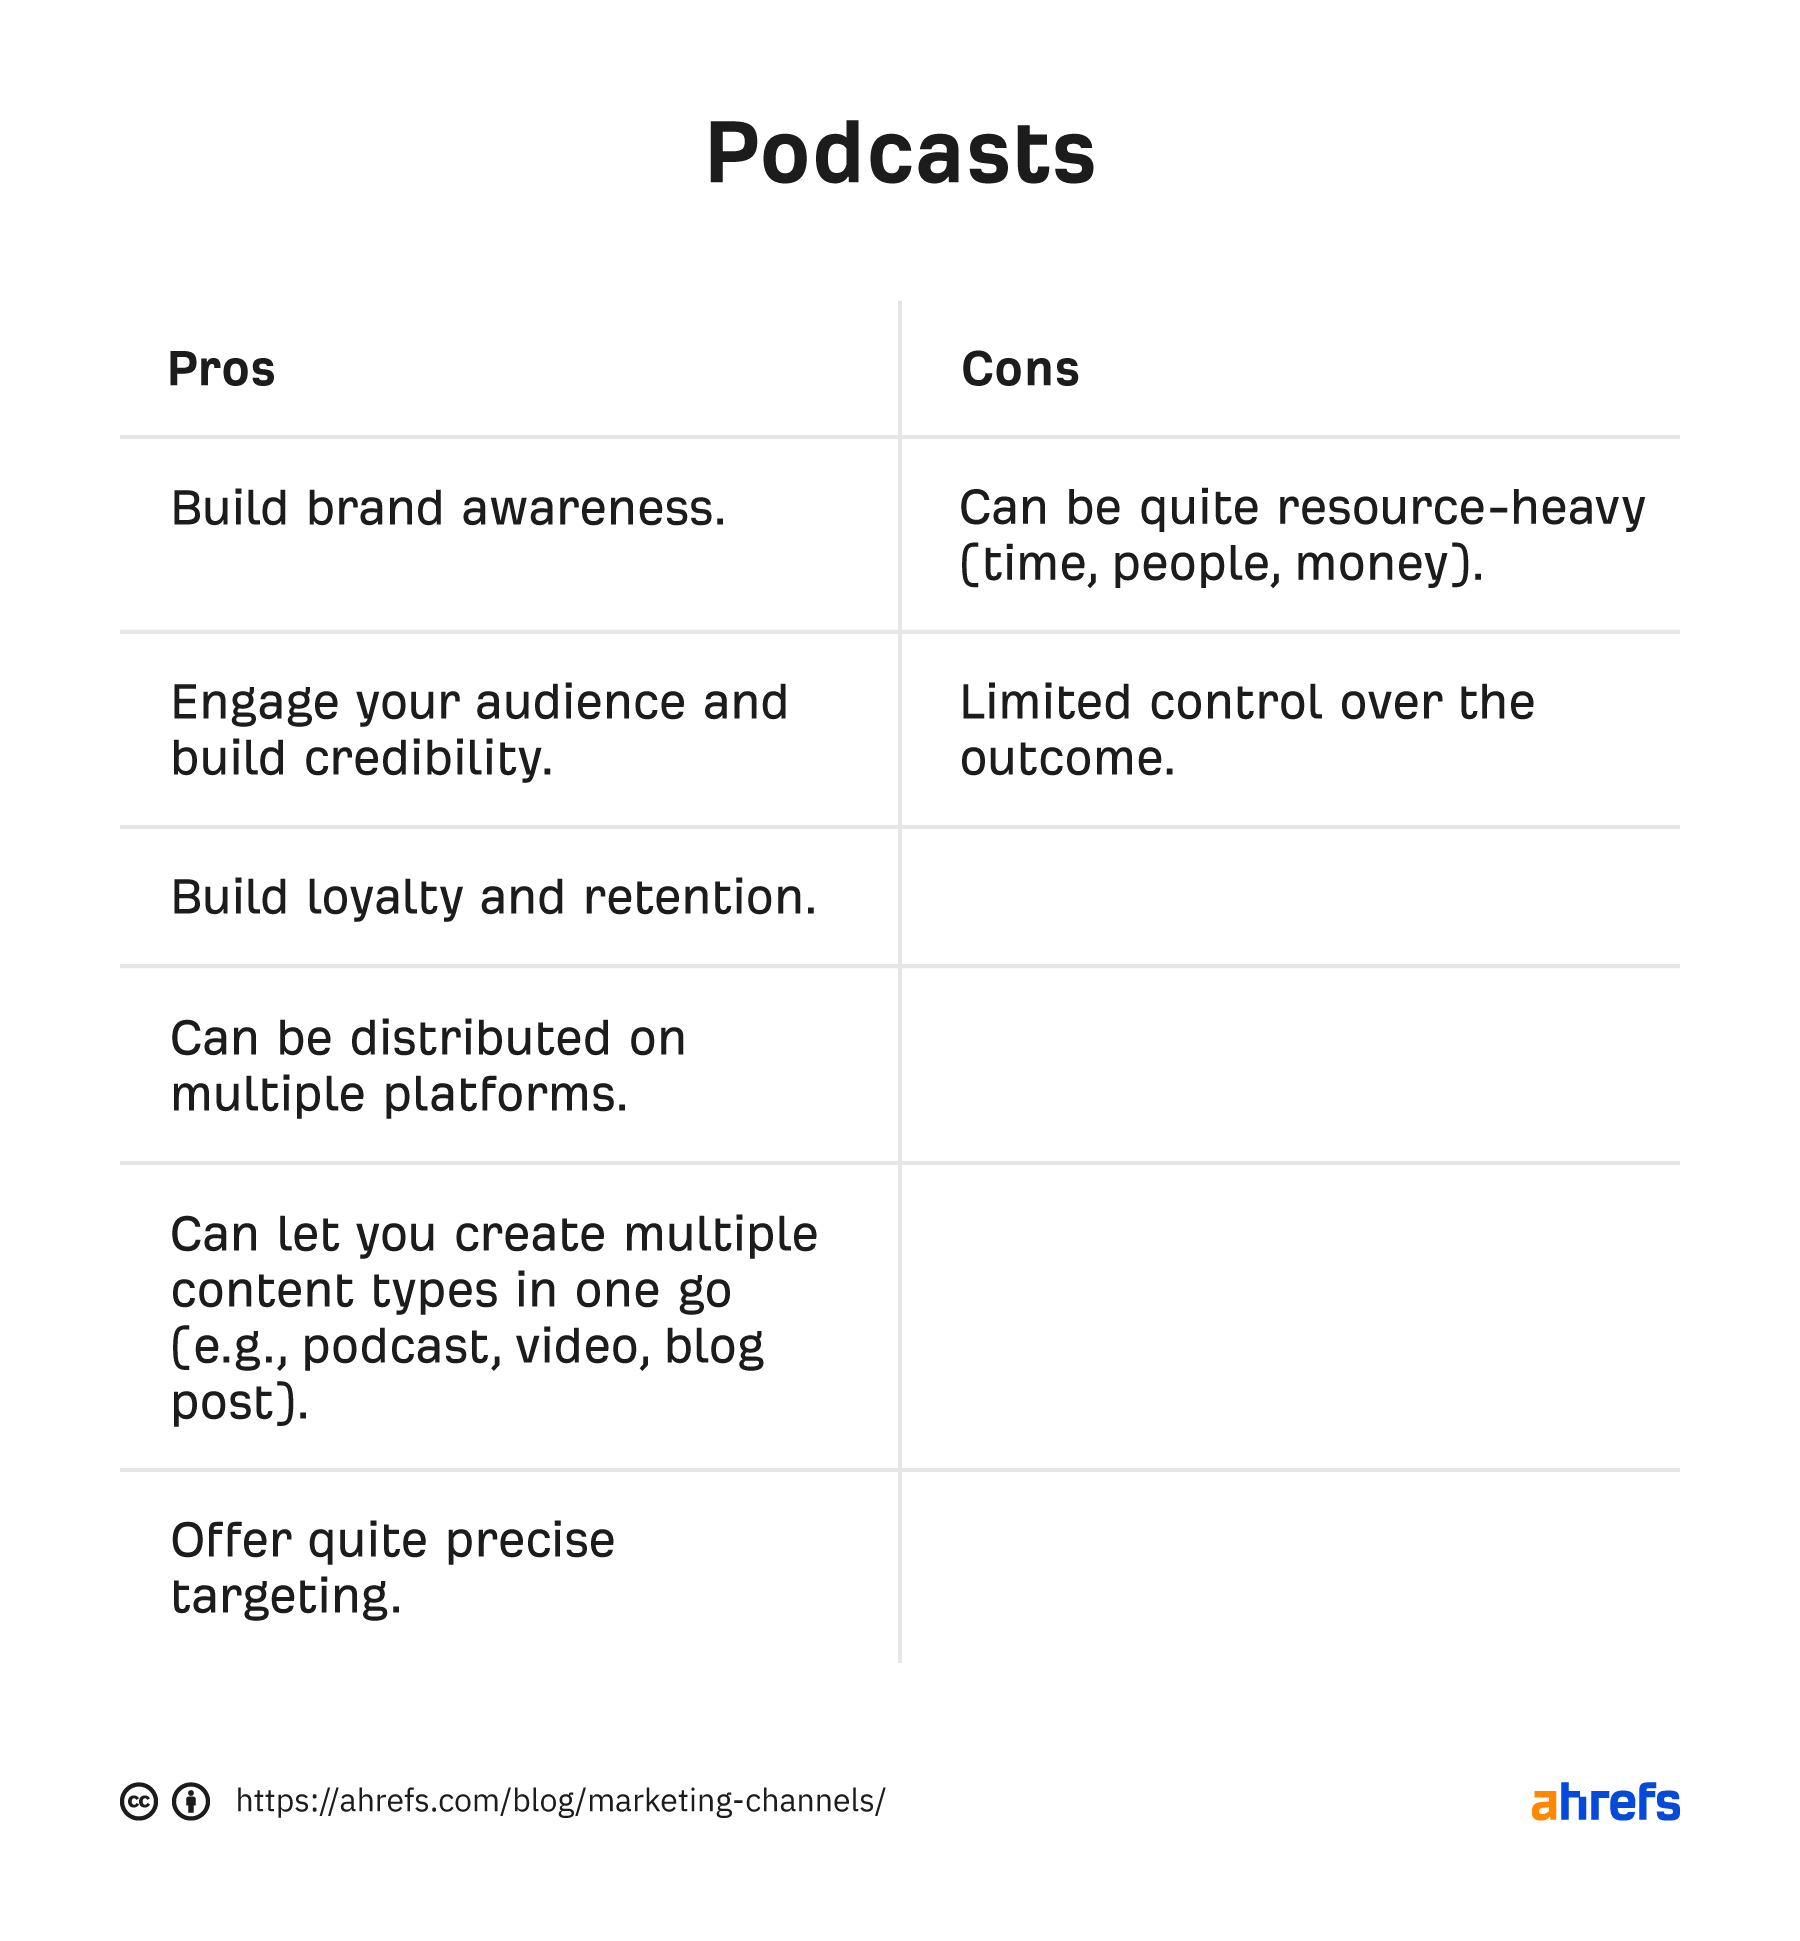 Pros and cons of podcasts